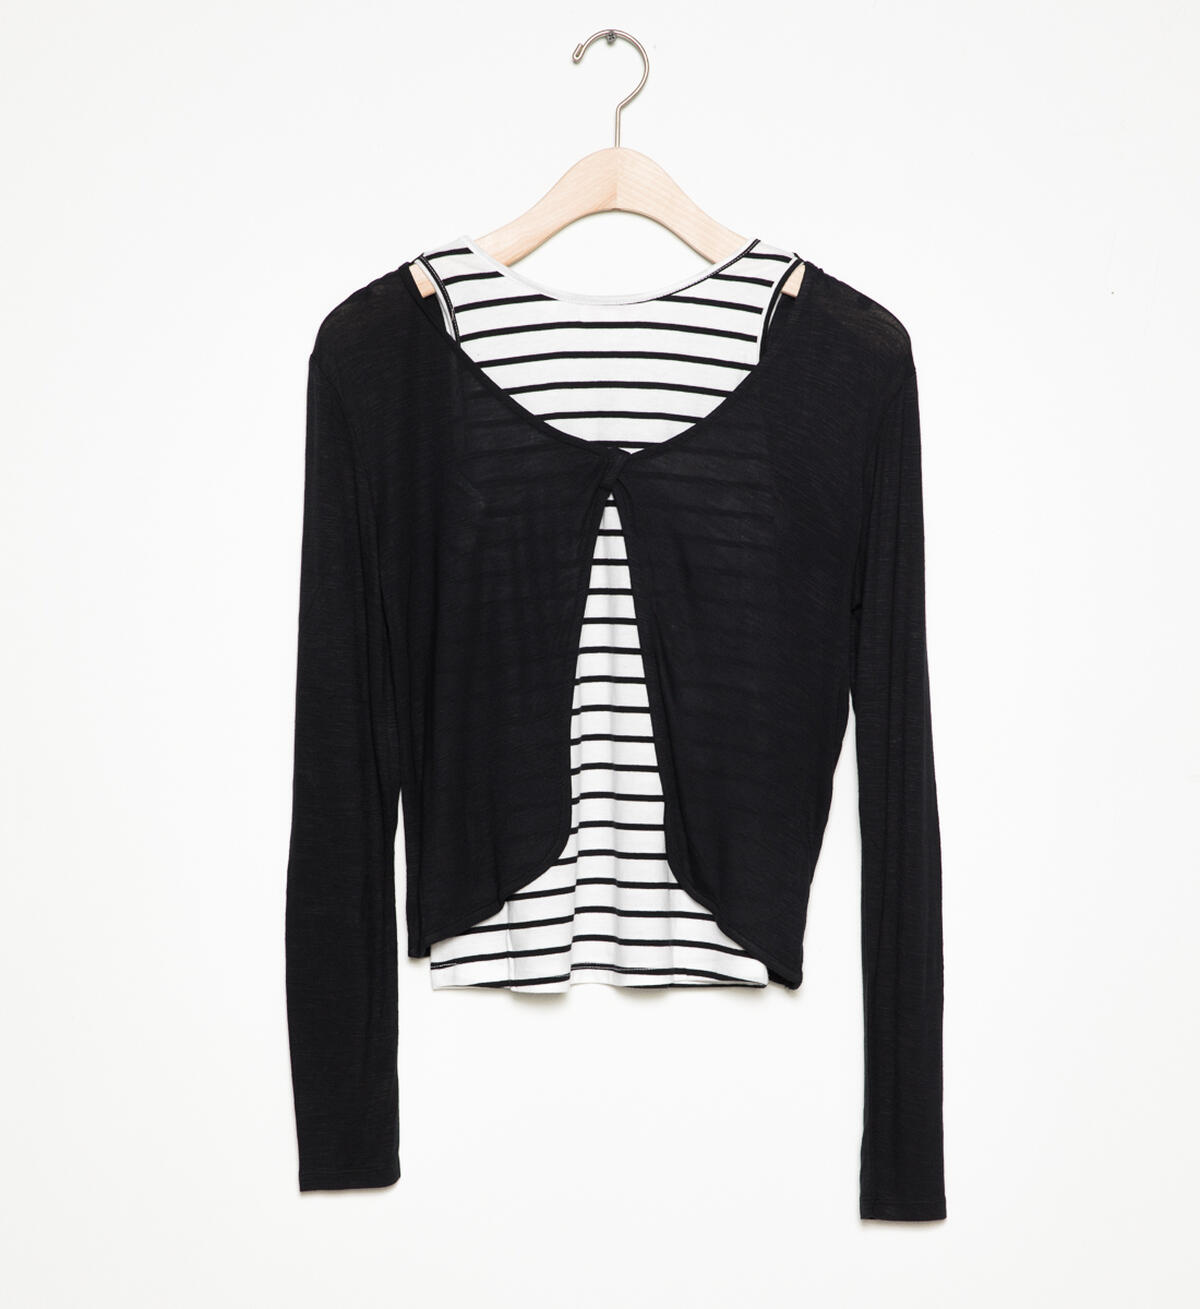 Long-Sleeve Layered Top (7-16), , hi-res image number 0